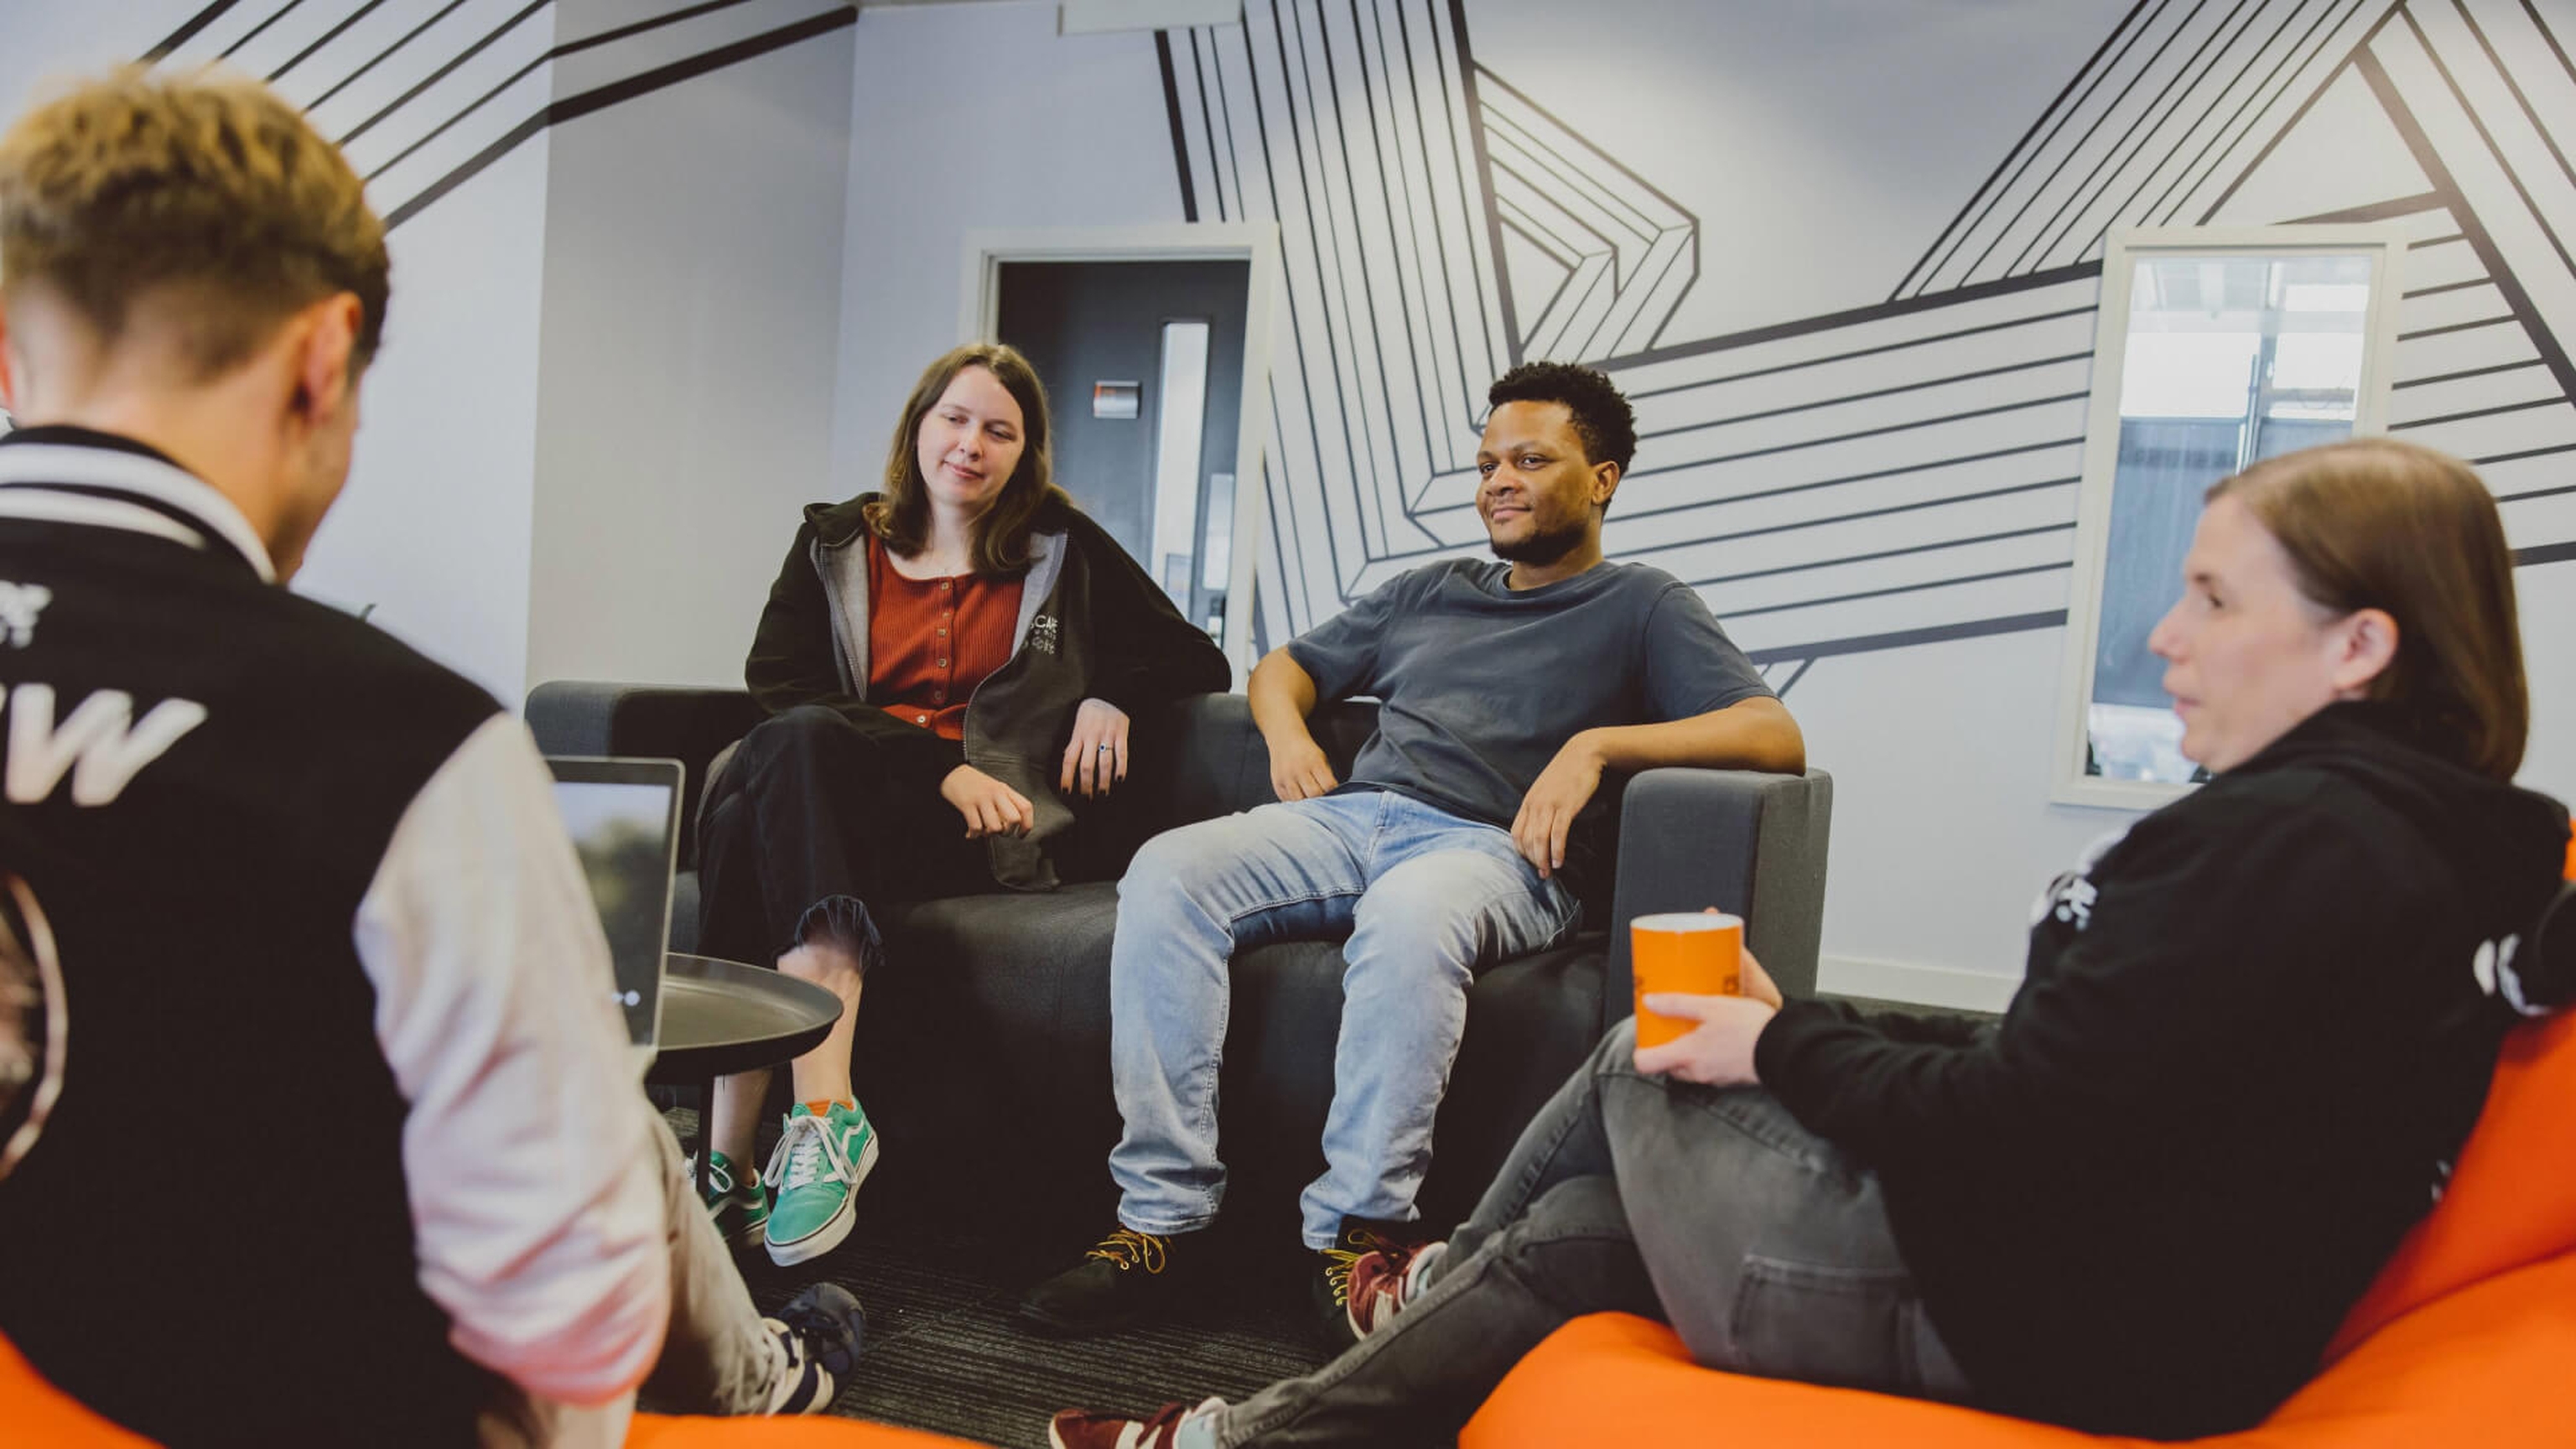 A group of four postgraduate students relaxing on orange beanbags and a grey sofa